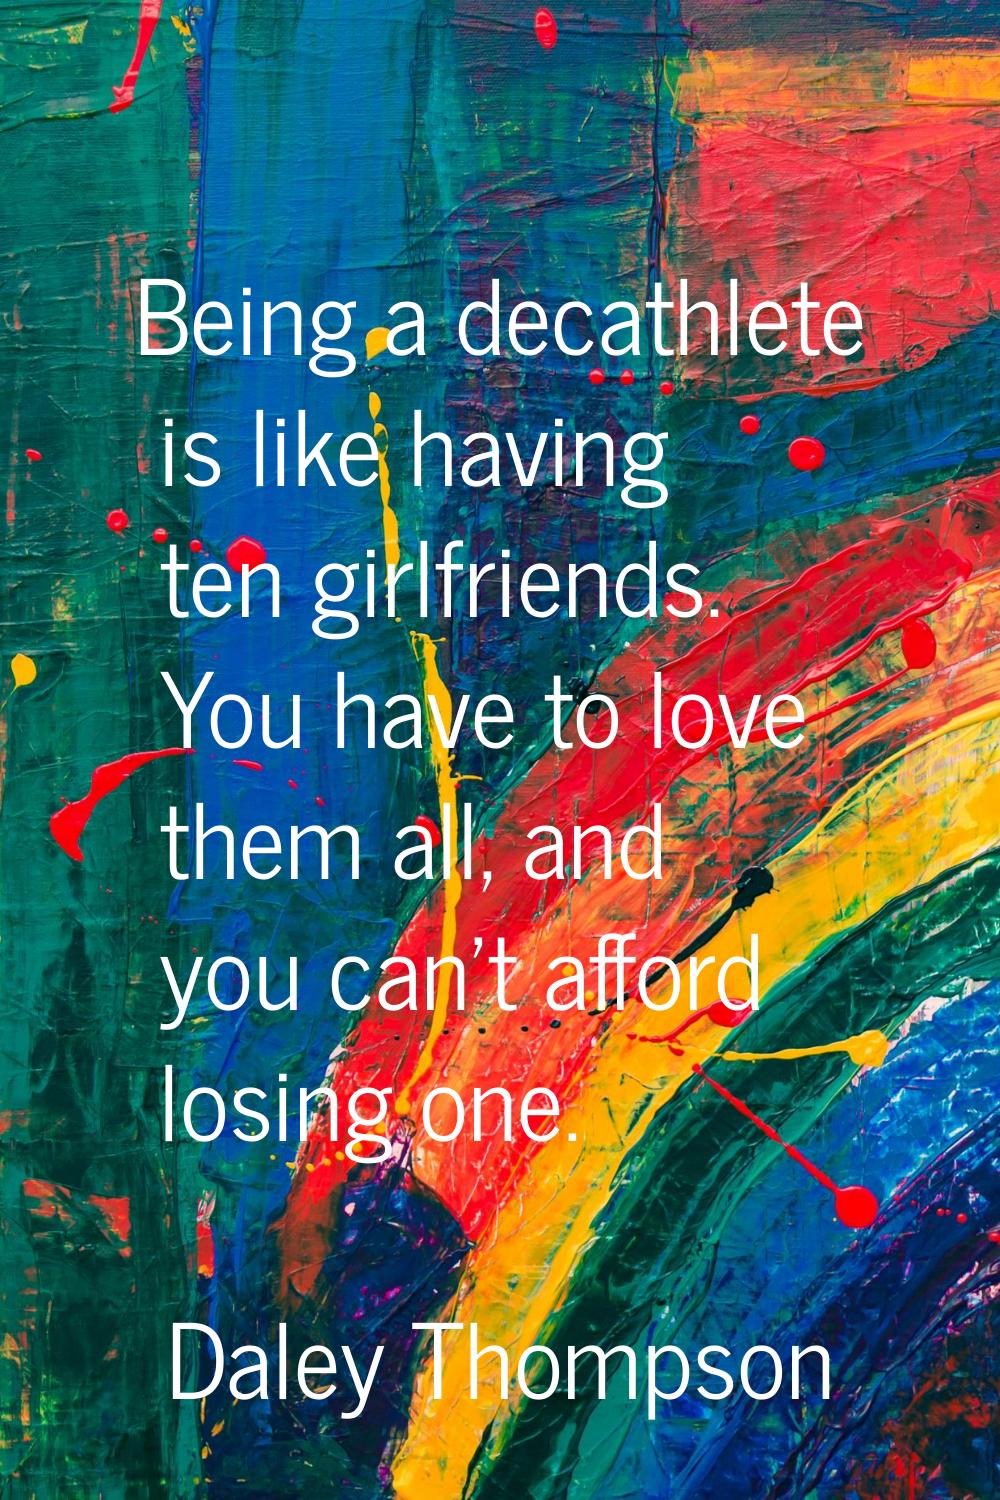 Being a decathlete is like having ten girlfriends. You have to love them all, and you can't afford 